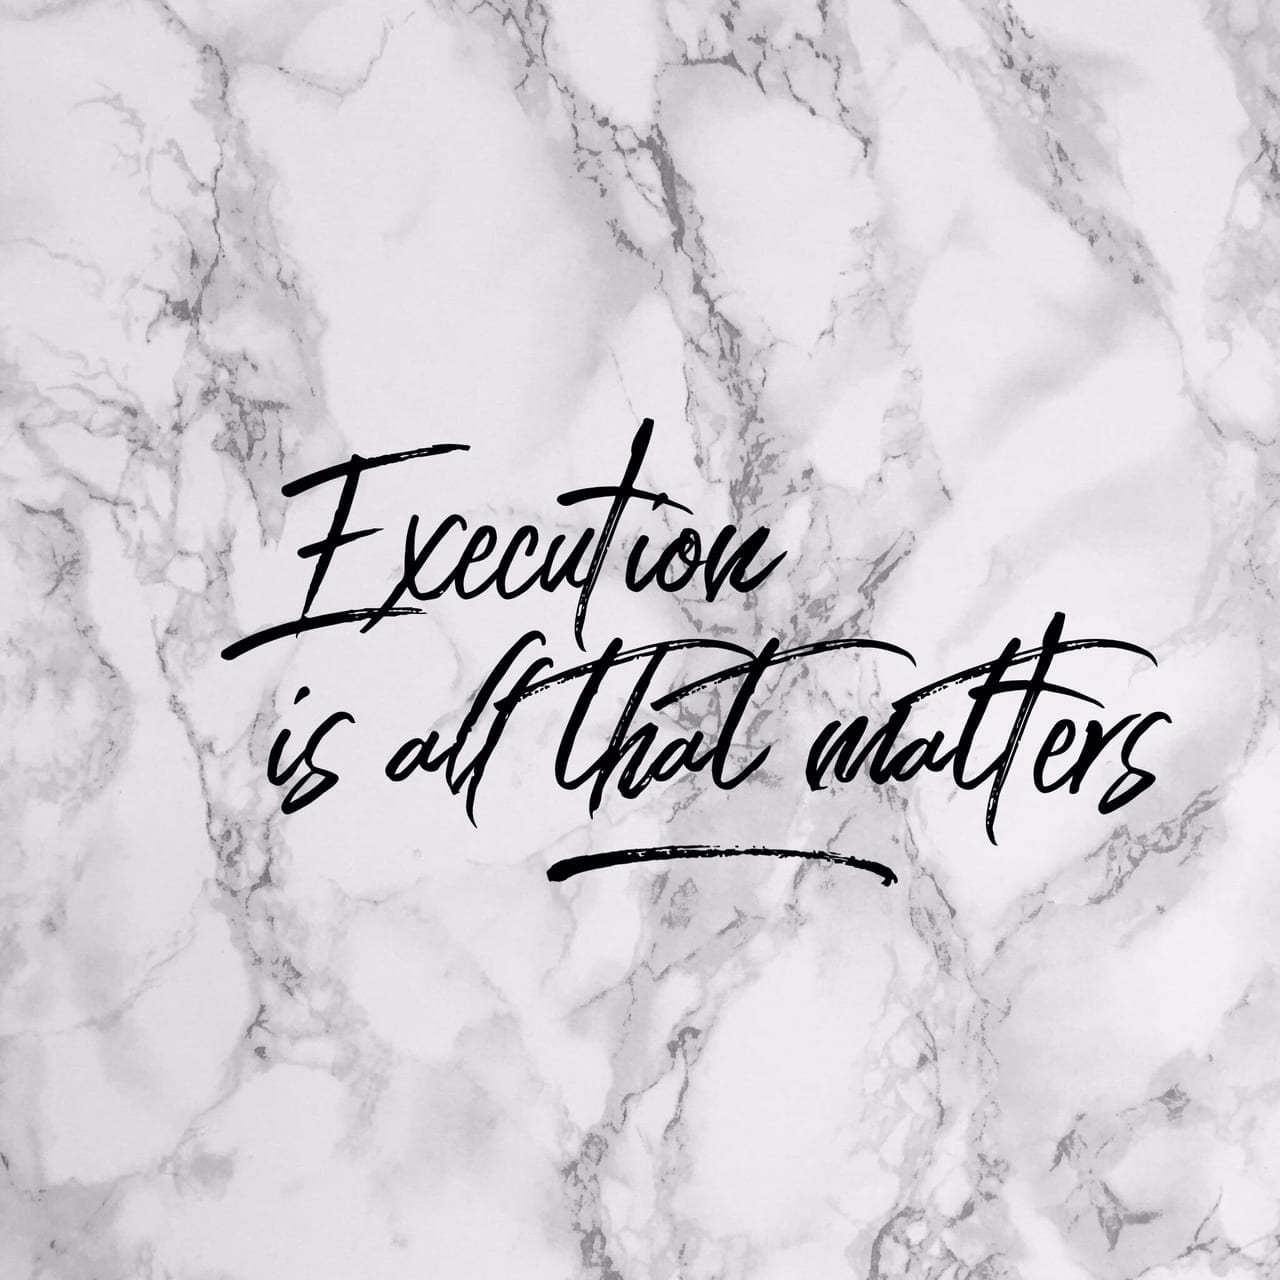 Execution is all that matters | The B Werd